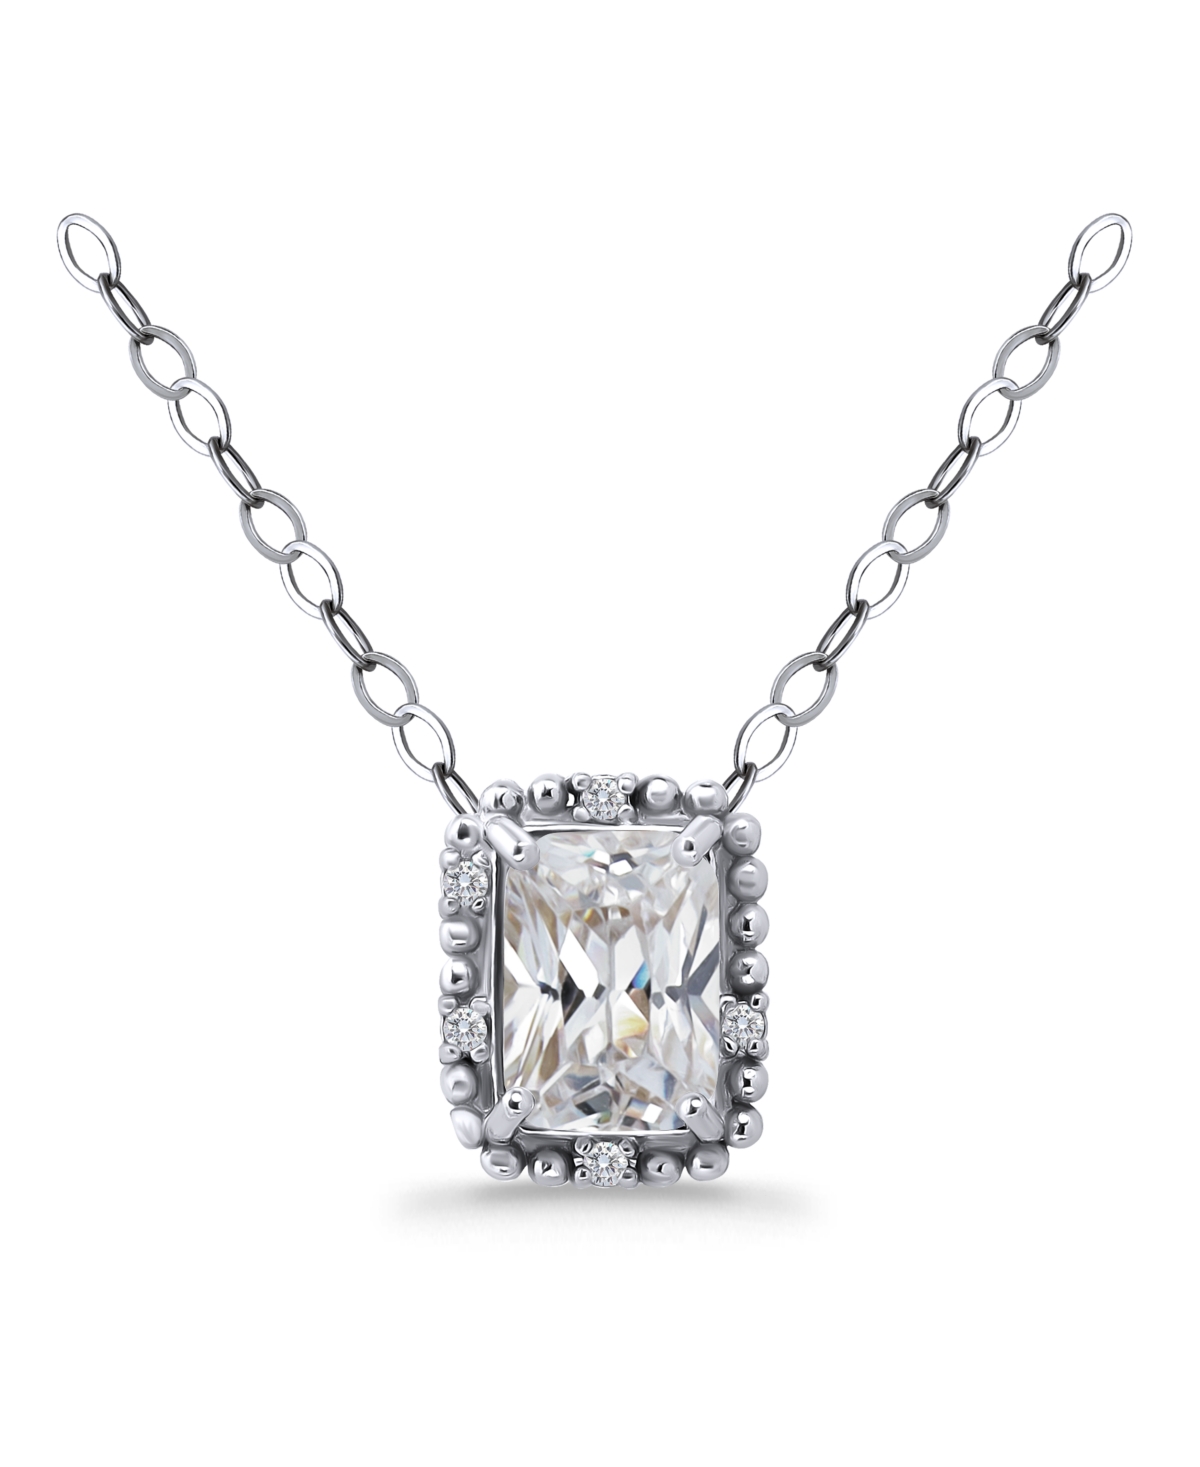 Shop Giani Bernini Cubic Zirconia Bead Frame Pendant Necklace In 18k Gold-plated Sterling Silver, 16" + 2" Extender, Cr